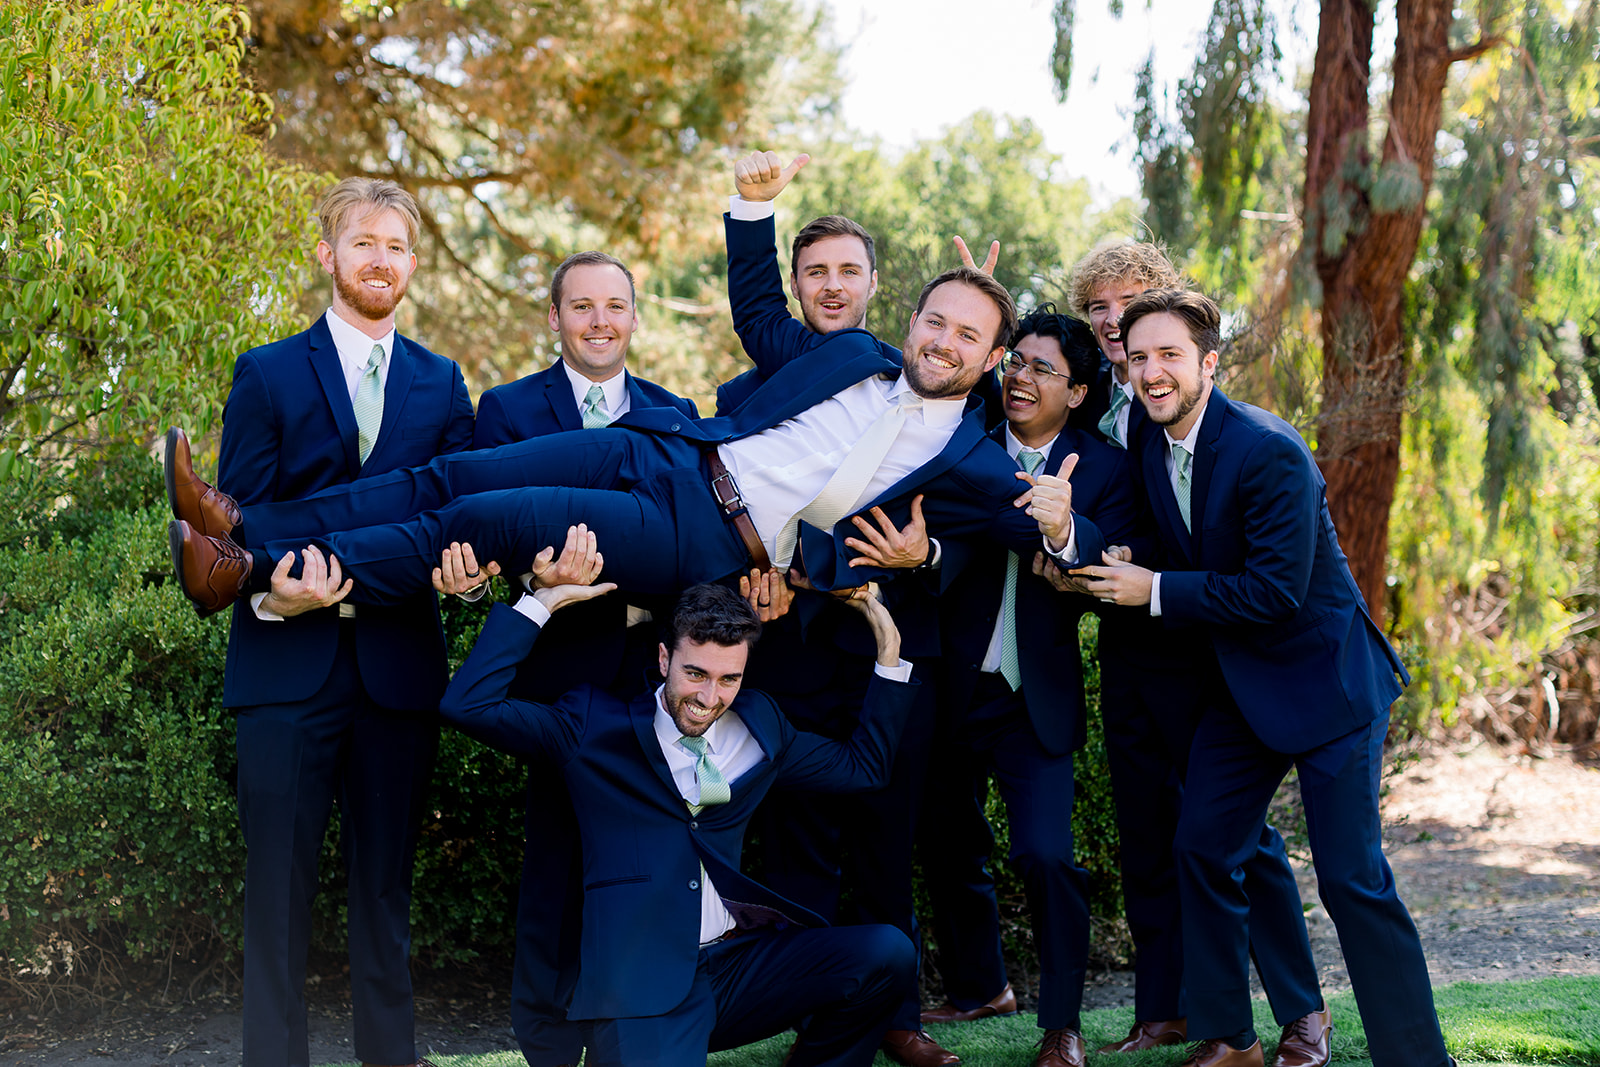 Groomsmen raising the groom in a cheerful toast, capturing the camaraderie before the ceremony